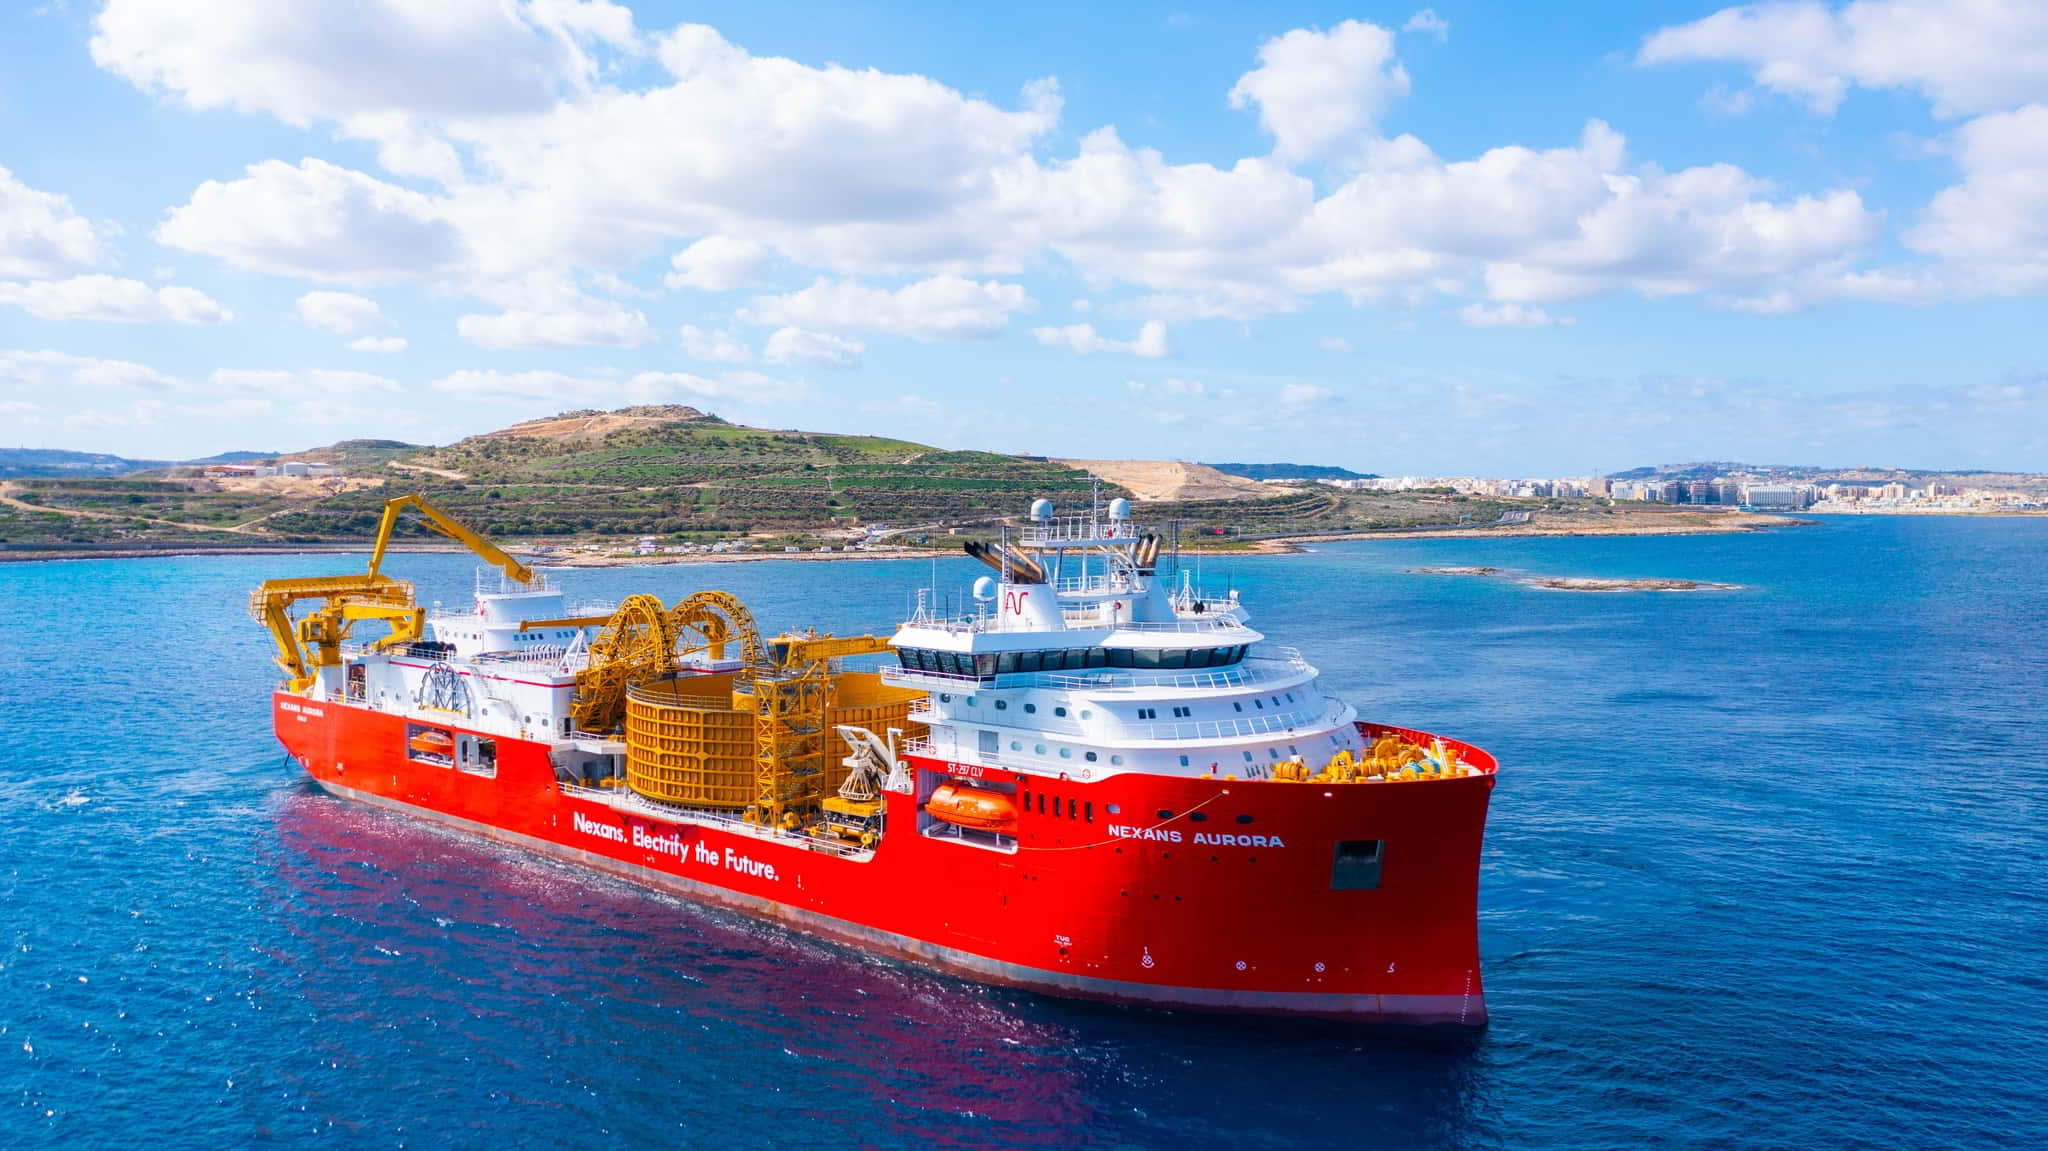 Following incident, Nexans and Enemalta patch up subsea interconnector – gallery